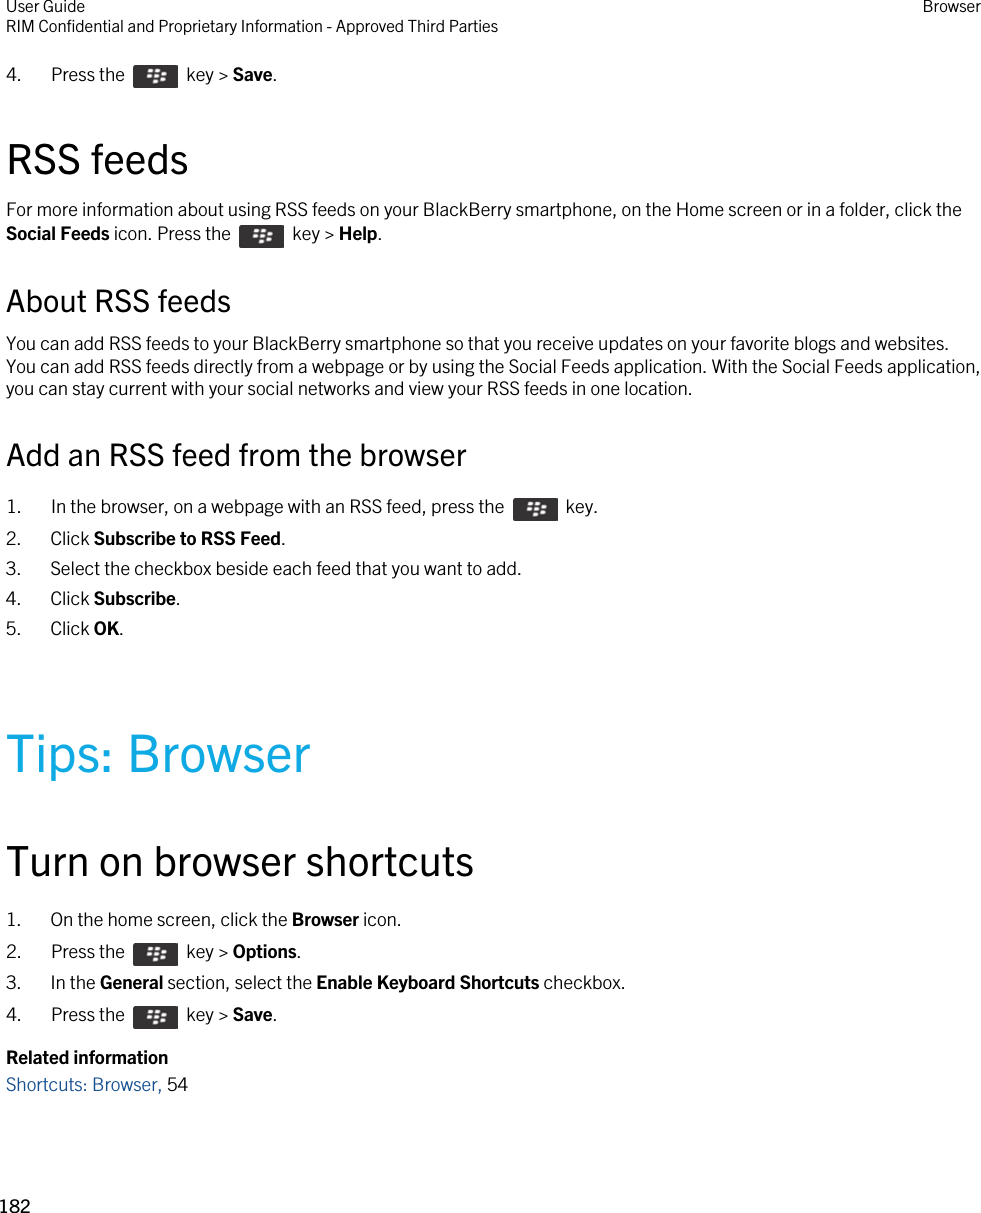 4.  Press the    key &gt; Save. RSS feedsFor more information about using RSS feeds on your BlackBerry smartphone, on the Home screen or in a folder, click the Social Feeds icon. Press the    key &gt; Help.About RSS feedsYou can add RSS feeds to your BlackBerry smartphone so that you receive updates on your favorite blogs and websites. You can add RSS feeds directly from a webpage or by using the Social Feeds application. With the Social Feeds application, you can stay current with your social networks and view your RSS feeds in one location.Add an RSS feed from the browser1.  In the browser, on a webpage with an RSS feed, press the    key. 2. Click Subscribe to RSS Feed.3. Select the checkbox beside each feed that you want to add.4. Click Subscribe.5. Click OK.Tips: BrowserTurn on browser shortcuts1. On the home screen, click the Browser icon.2.  Press the    key &gt; Options. 3. In the General section, select the Enable Keyboard Shortcuts checkbox.4.  Press the    key &gt; Save. Related informationShortcuts: Browser, 54 User GuideRIM Confidential and Proprietary Information - Approved Third Parties Browser182 